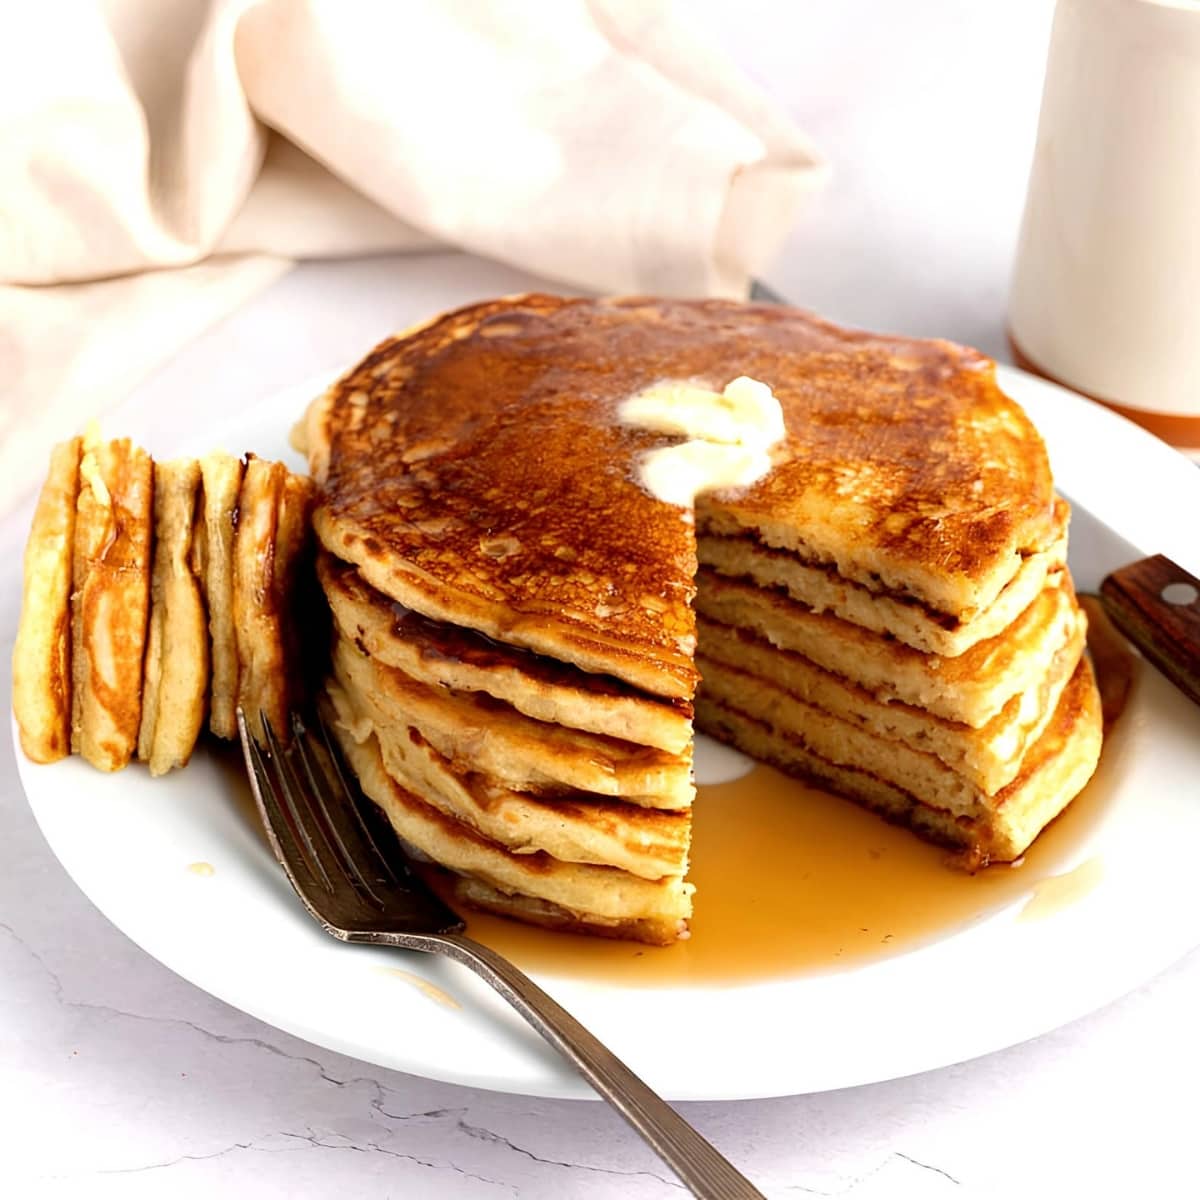 Sliced Fluffy Pancakes Dripping With Maple Syrup and Butter